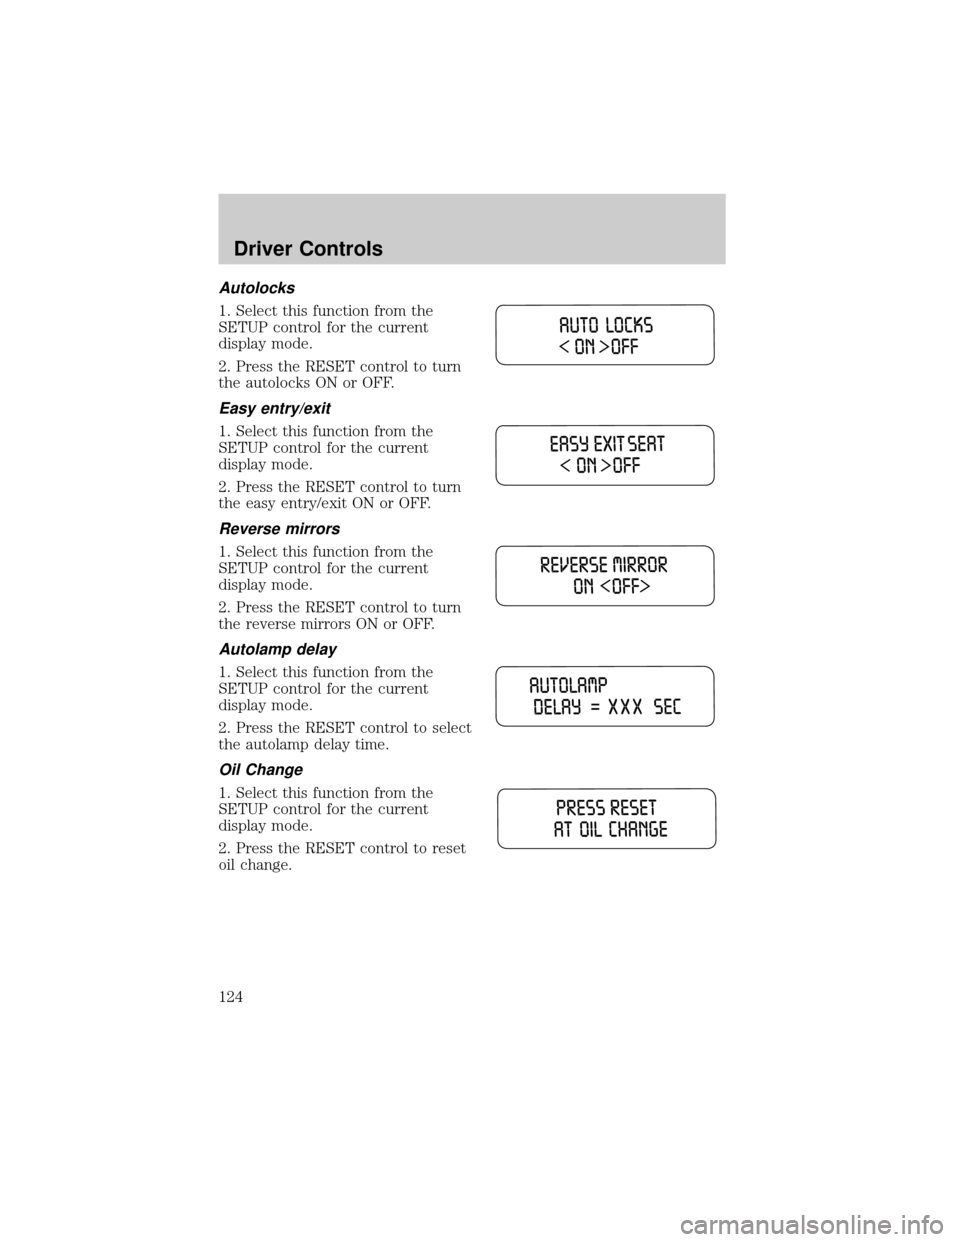 LINCOLN AVIATOR 2004  Owners Manual Autolocks
1. Select this function from the
SETUP control for the current
display mode.
2. Press the RESET control to turn
the autolocks ON or OFF.
Easy entry/exit
1. Select this function from the
SETU